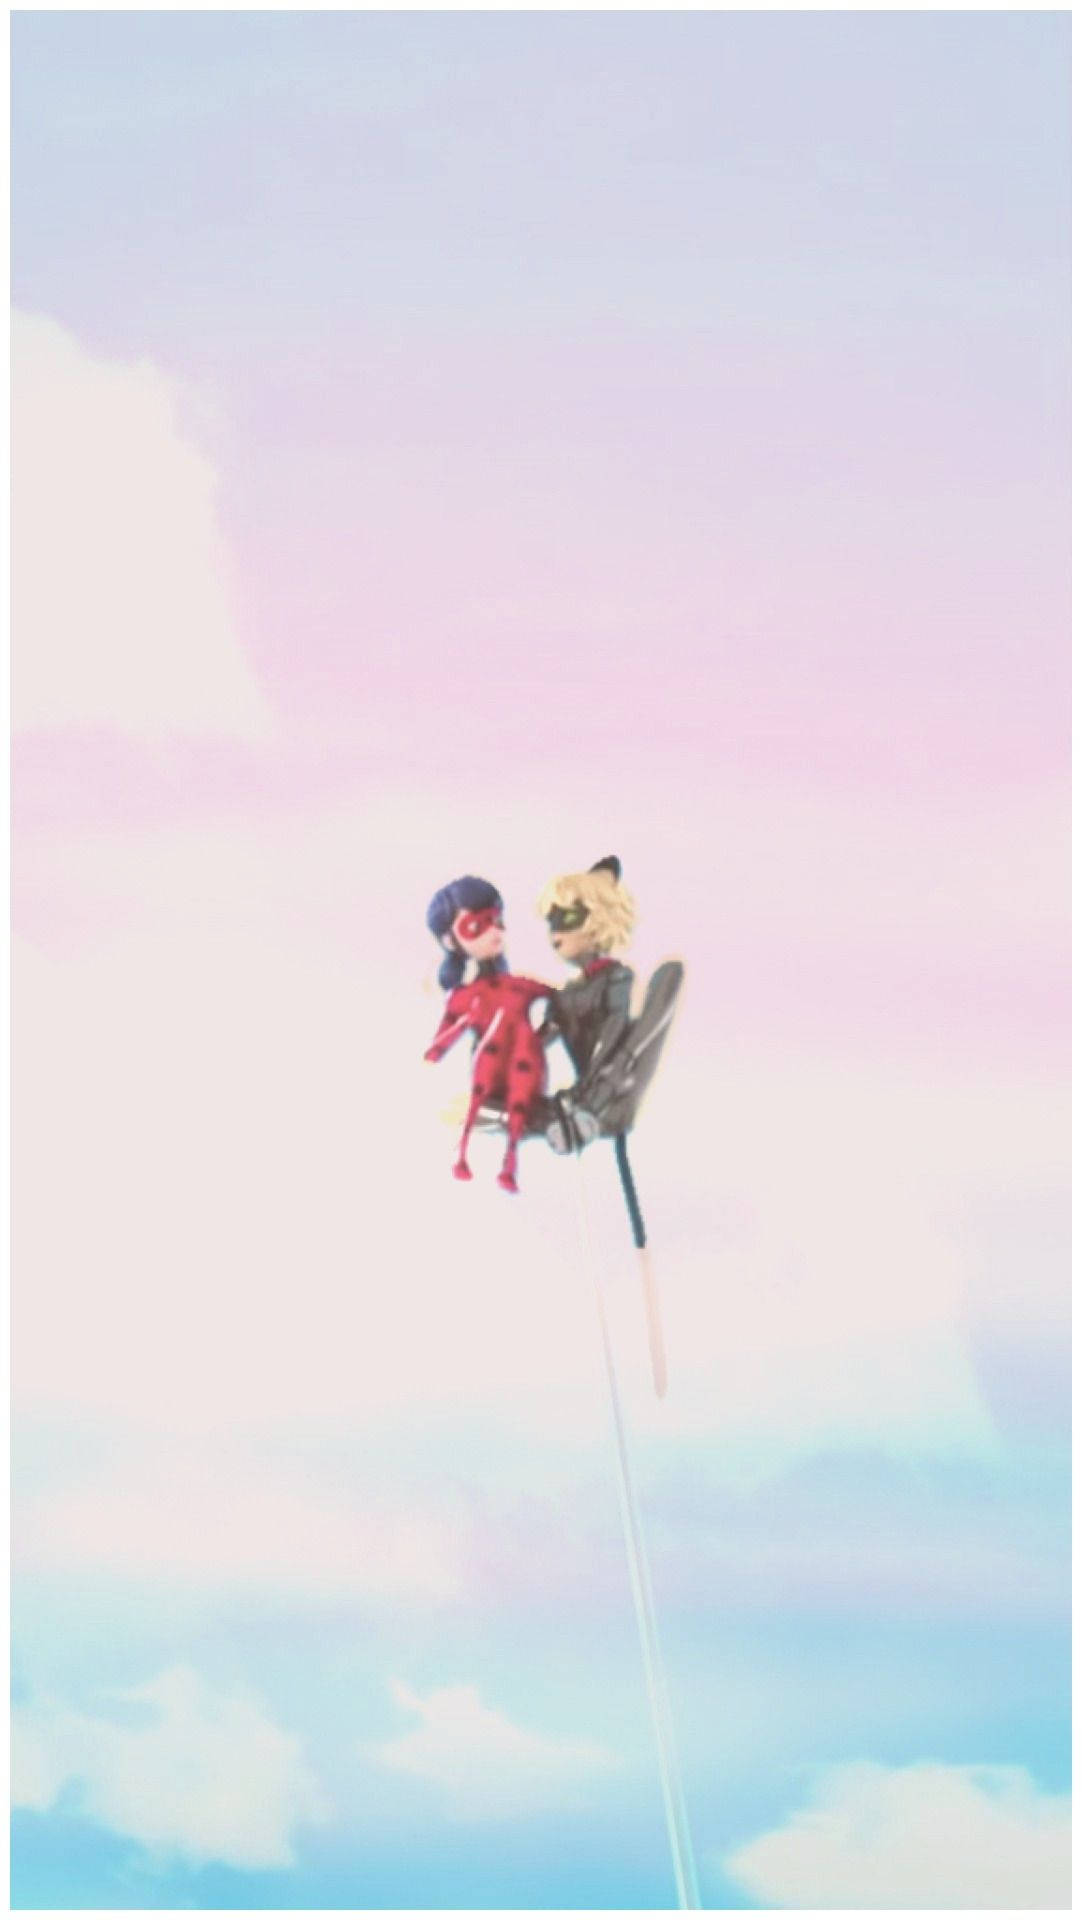 Miraculous Ladybug And Cat Noir In The Clouds Background